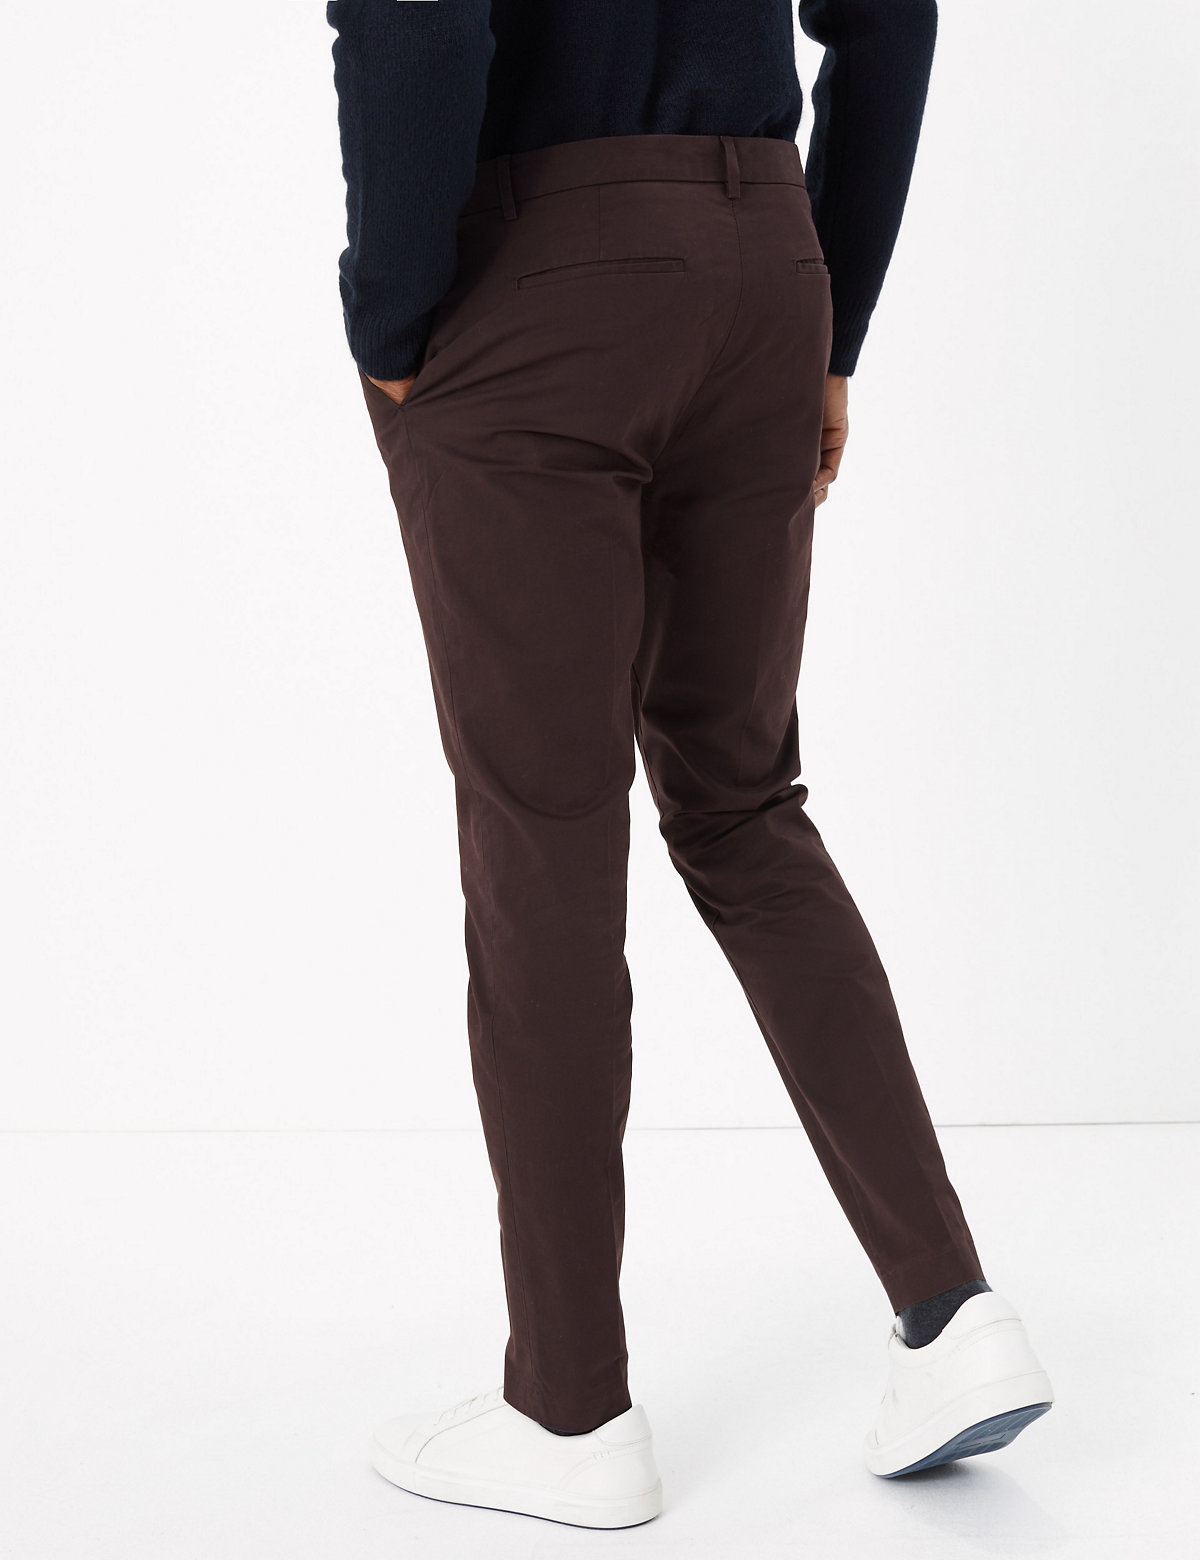 Skinny Fit Smart Chinos